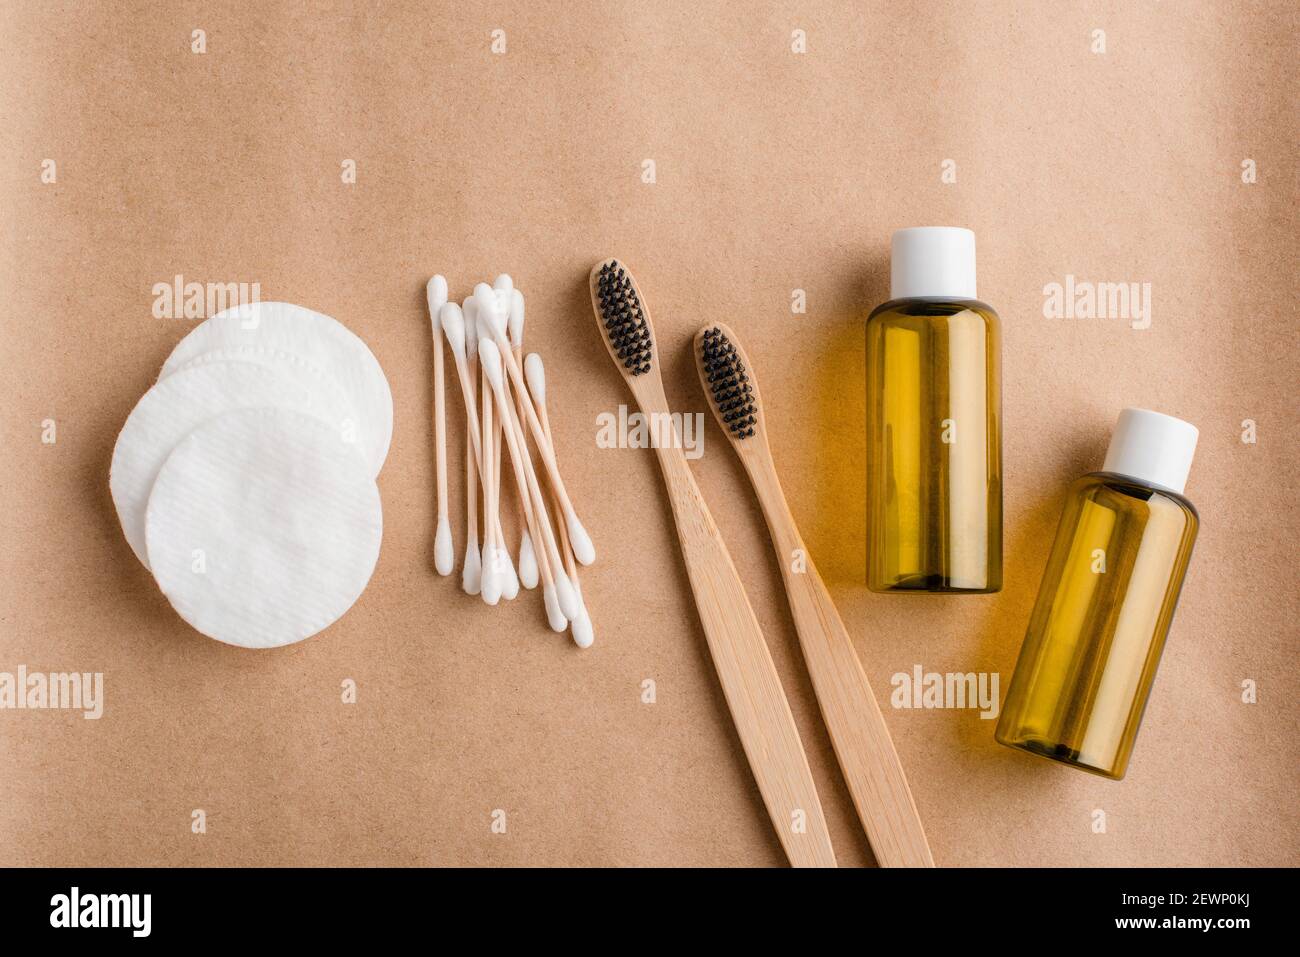 Eco friendly cosmetology and medical cleansing accessories. Cotton pads, bamboo ear sticks, oil essence pots and charcoal toothbrushes on beige backgr Stock Photo